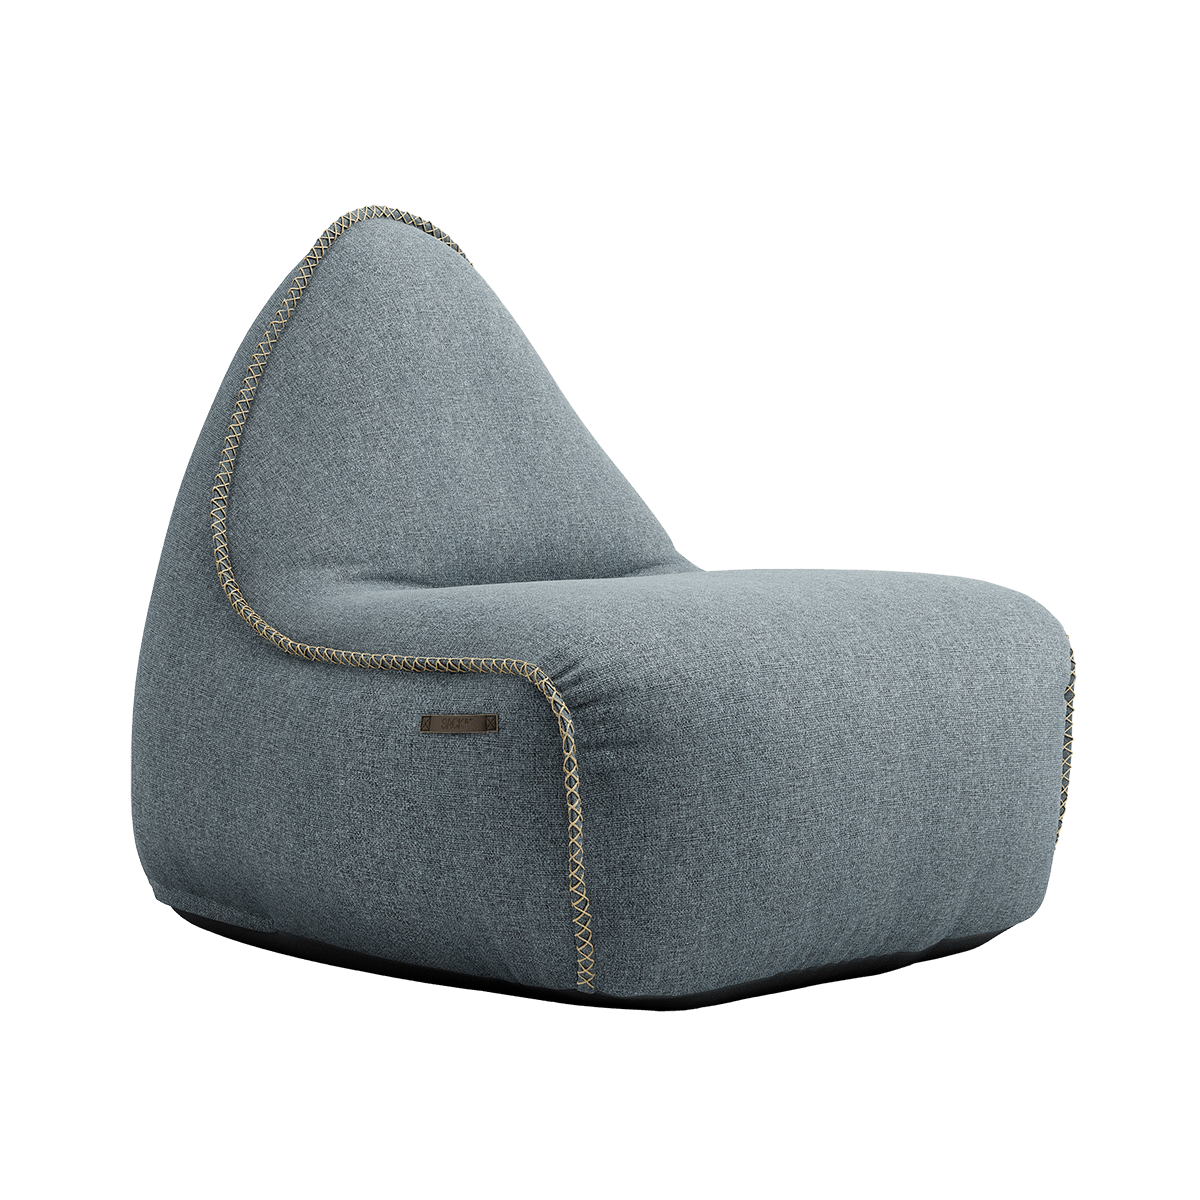 variant_8567001% | Medley Lounge Chair [Contract] - Medley Dusty Blue | SACKit